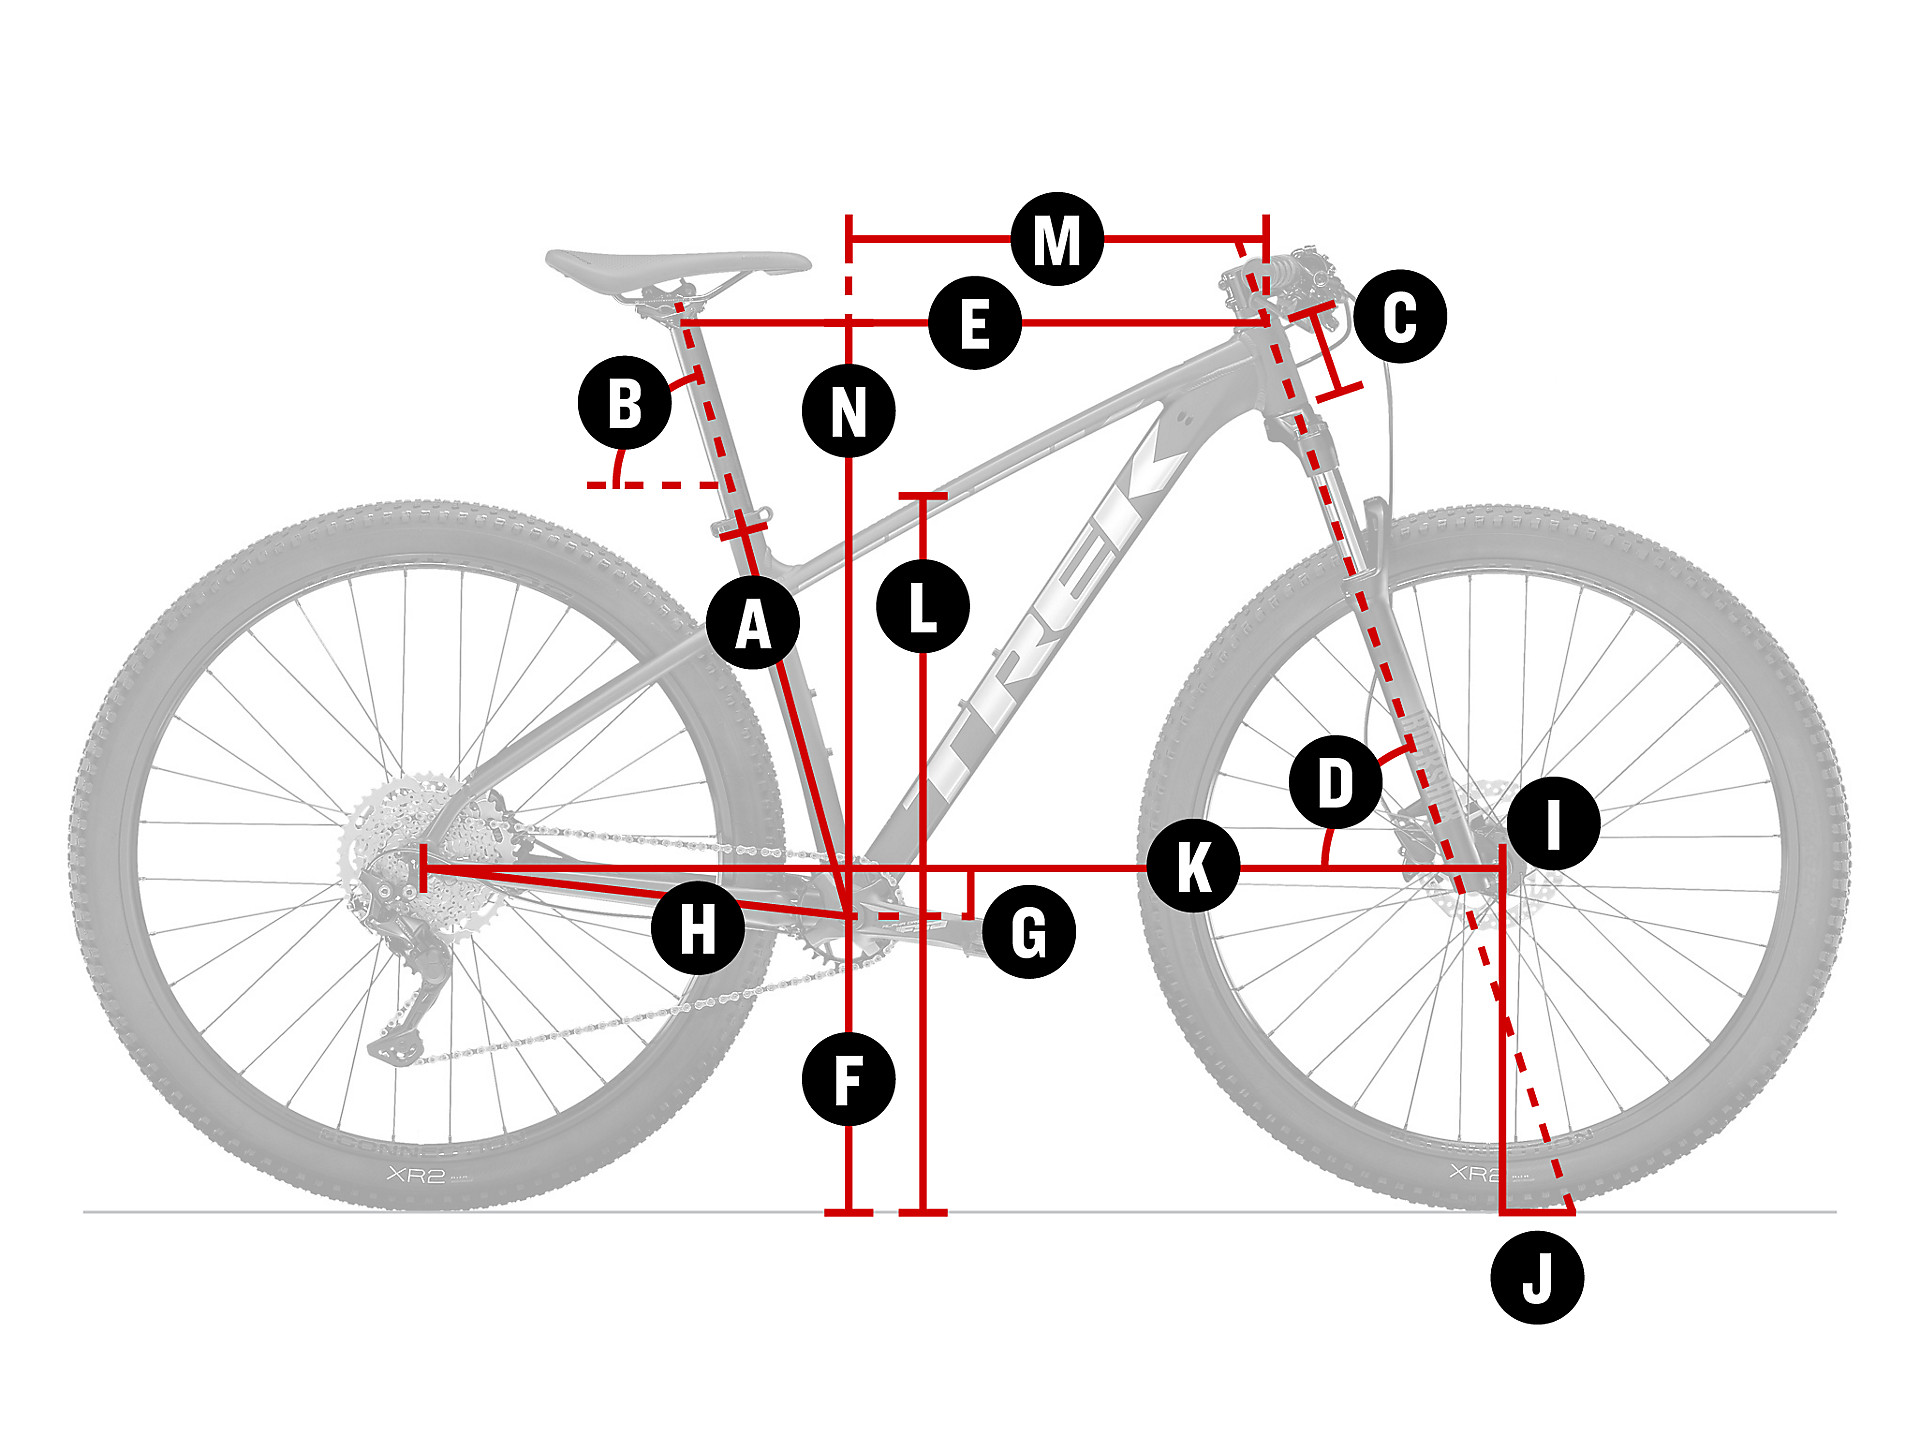 Geometry Lines 2050x1500 MTB Marlin7?$responsive pjpg$&cache=on,on&wid=1920&hei=1440&fit=fit,1